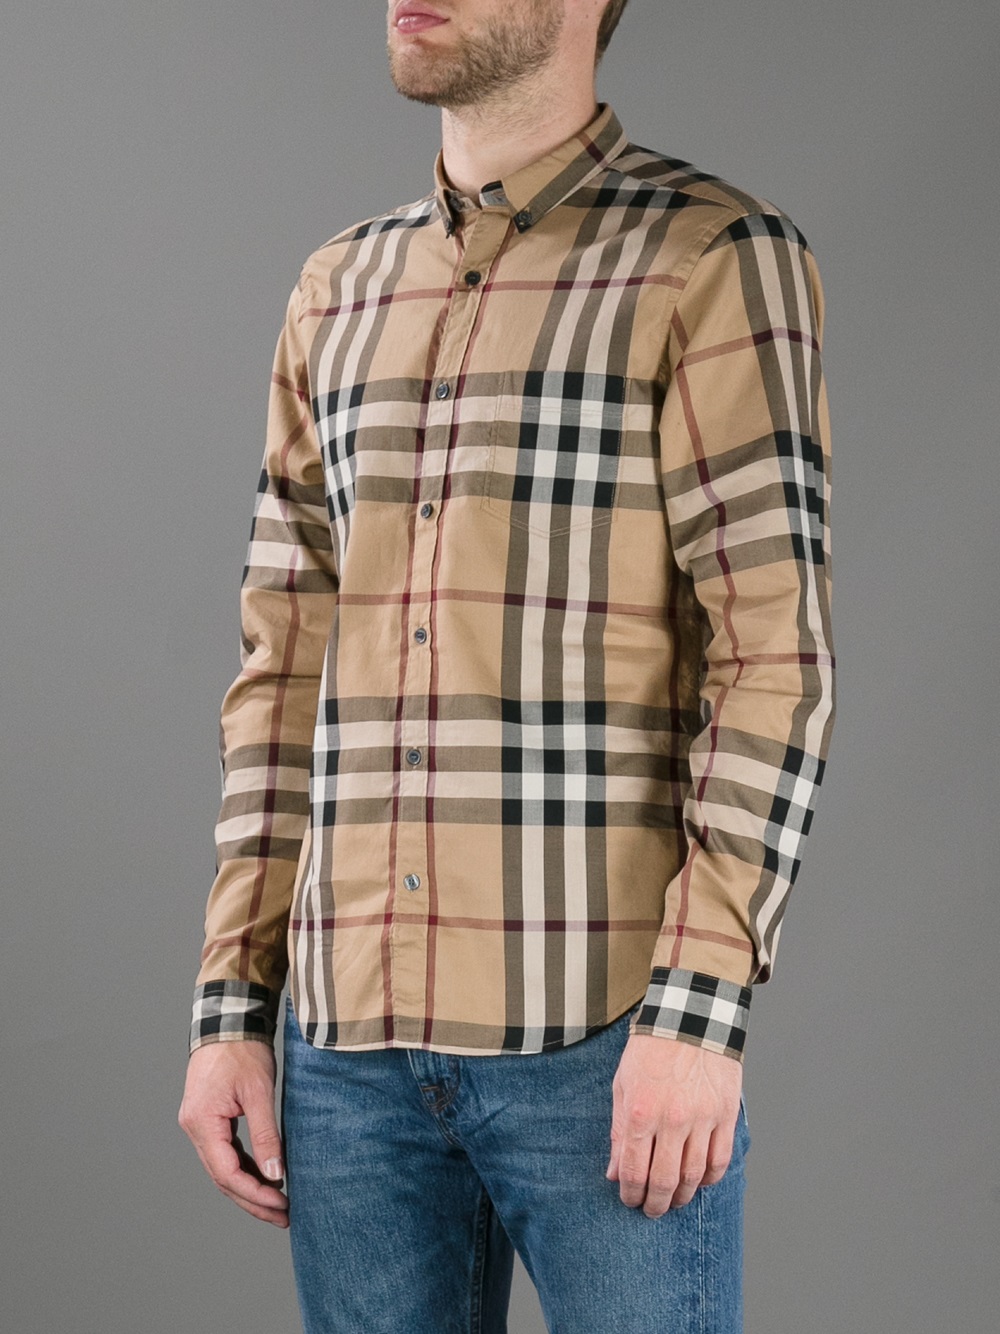 burberry outfit mens